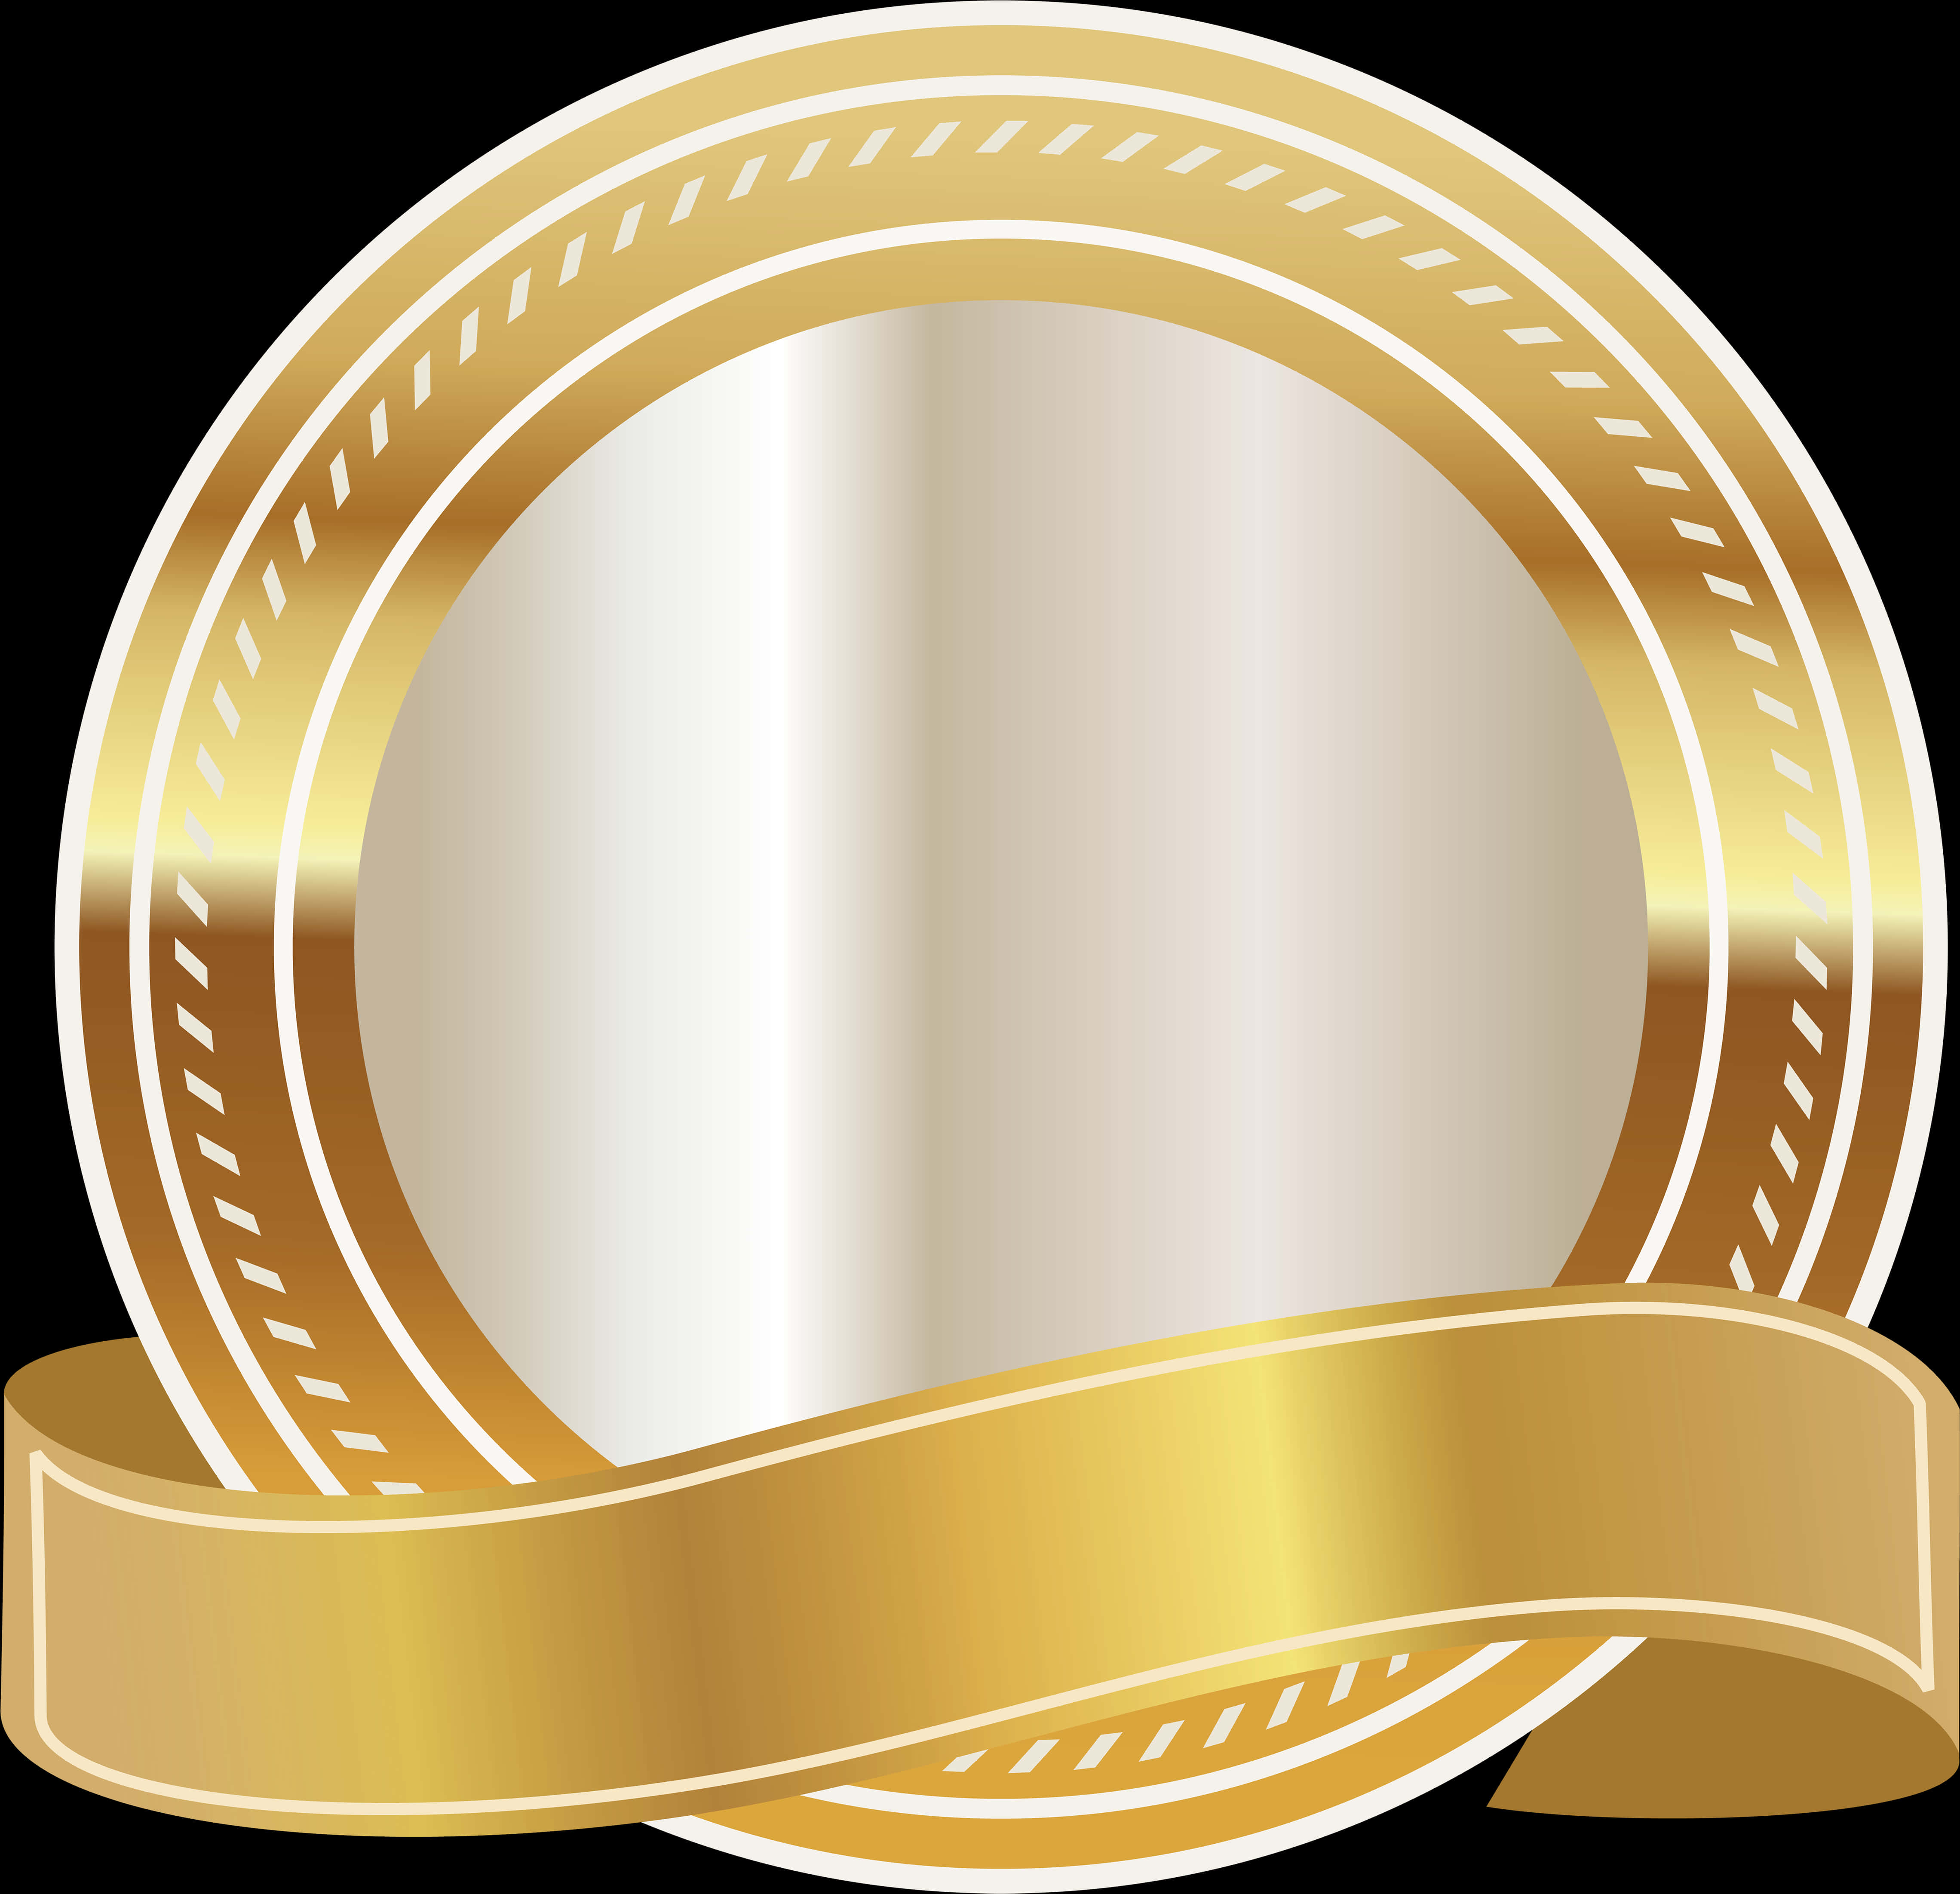 A Gold And White Circle With A Ribbon